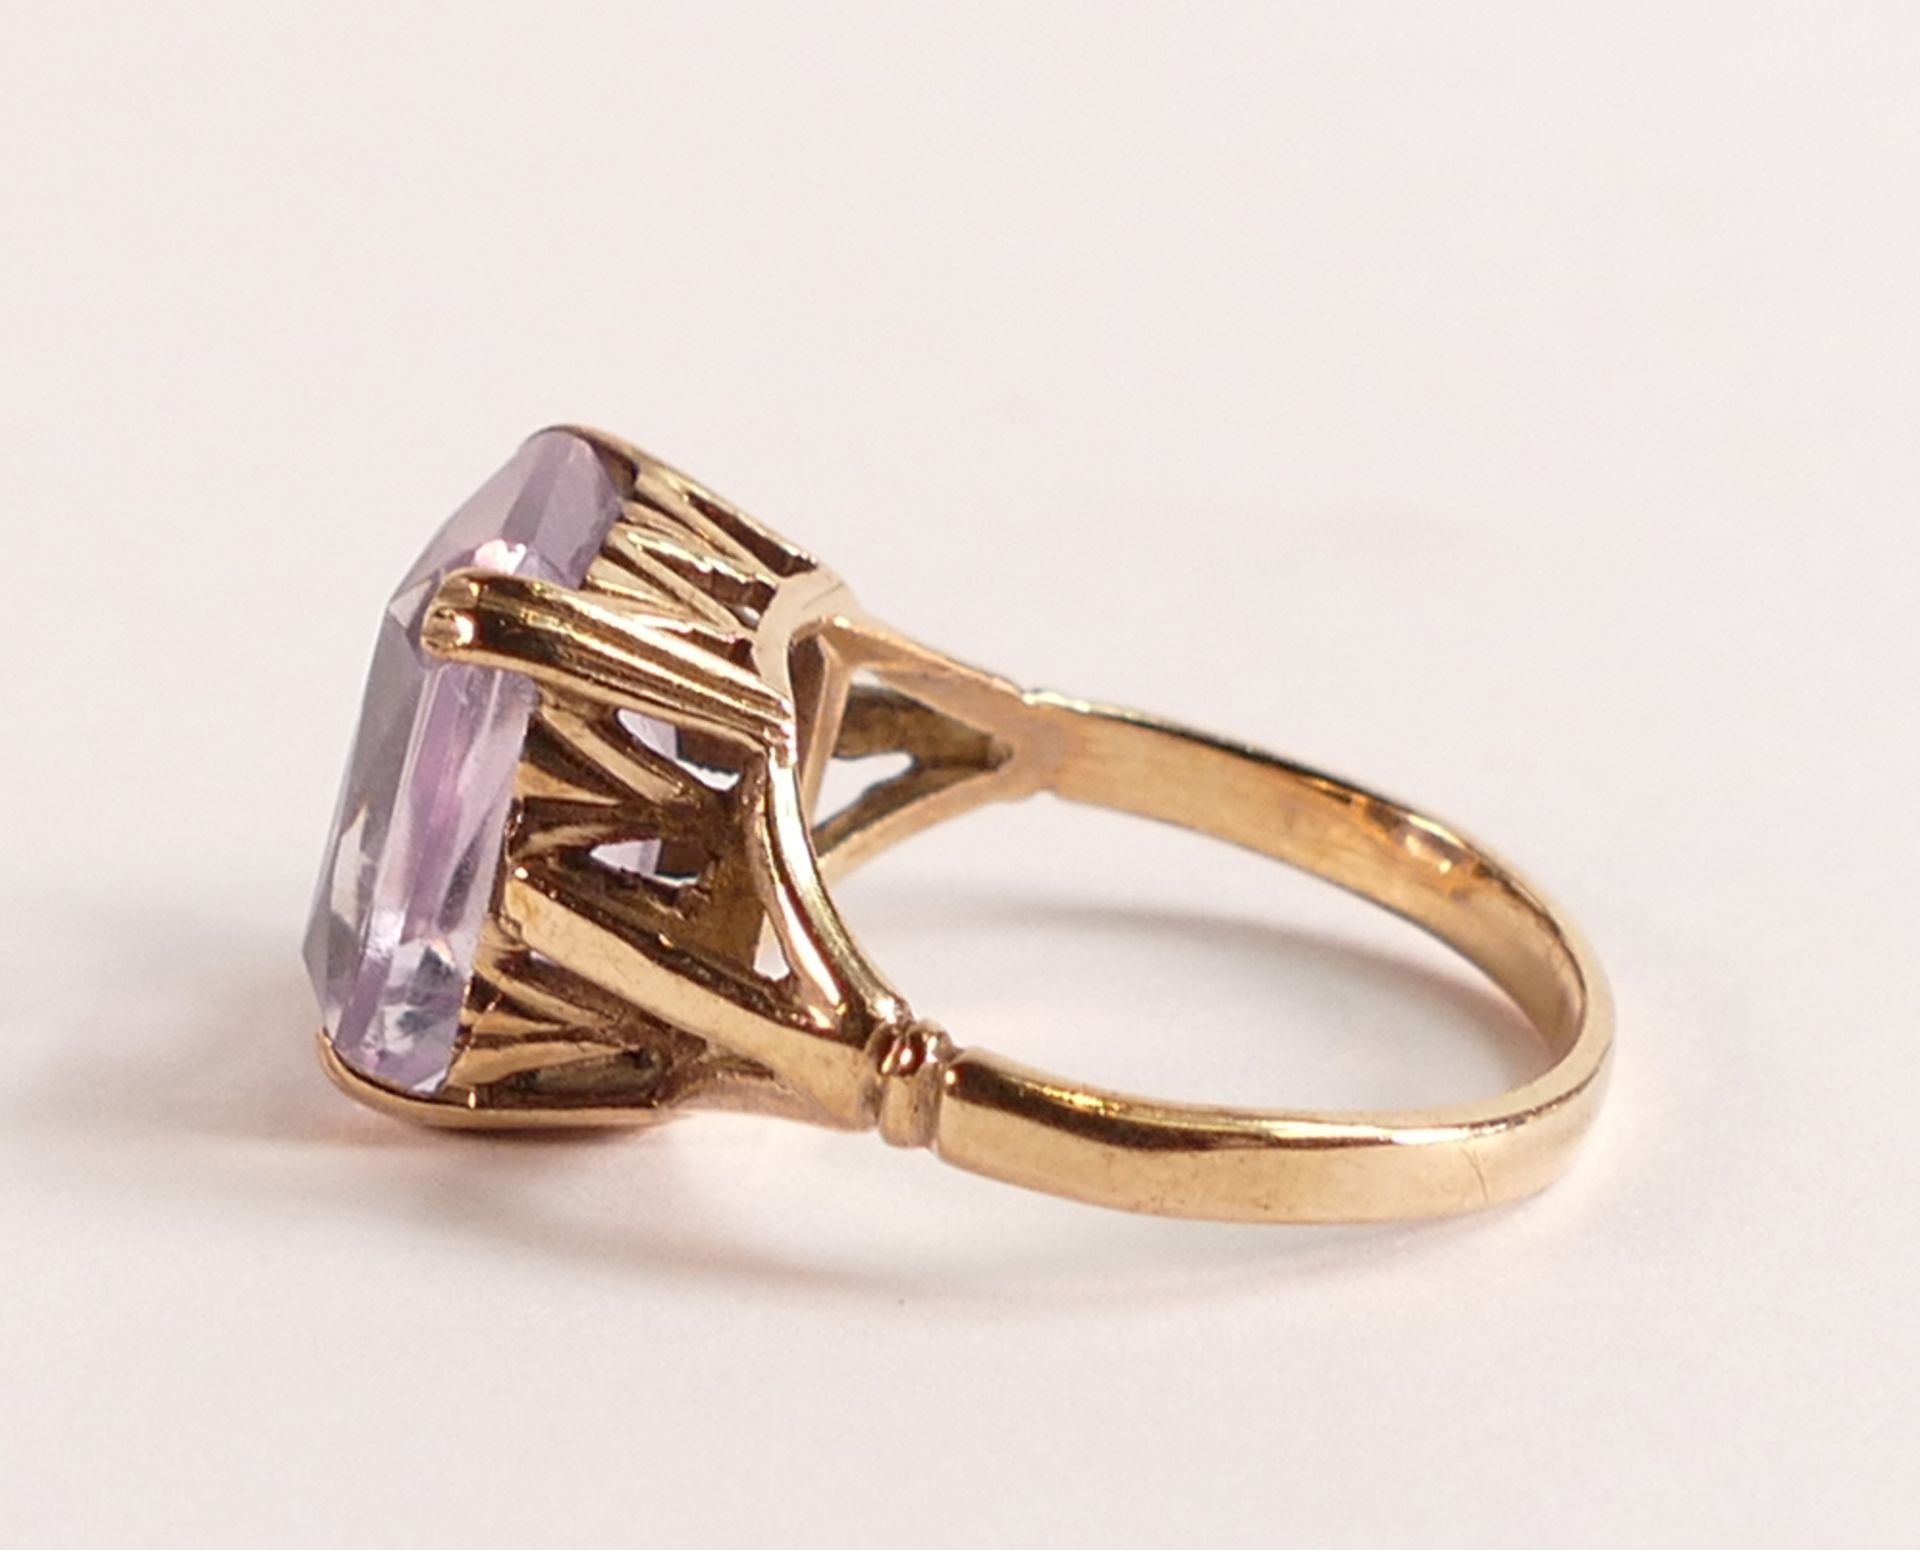 9ct Gold Lavender Quartz Ring - The ring mount is solid 9ct yellow gold, hallmarked 375 and - Image 2 of 3